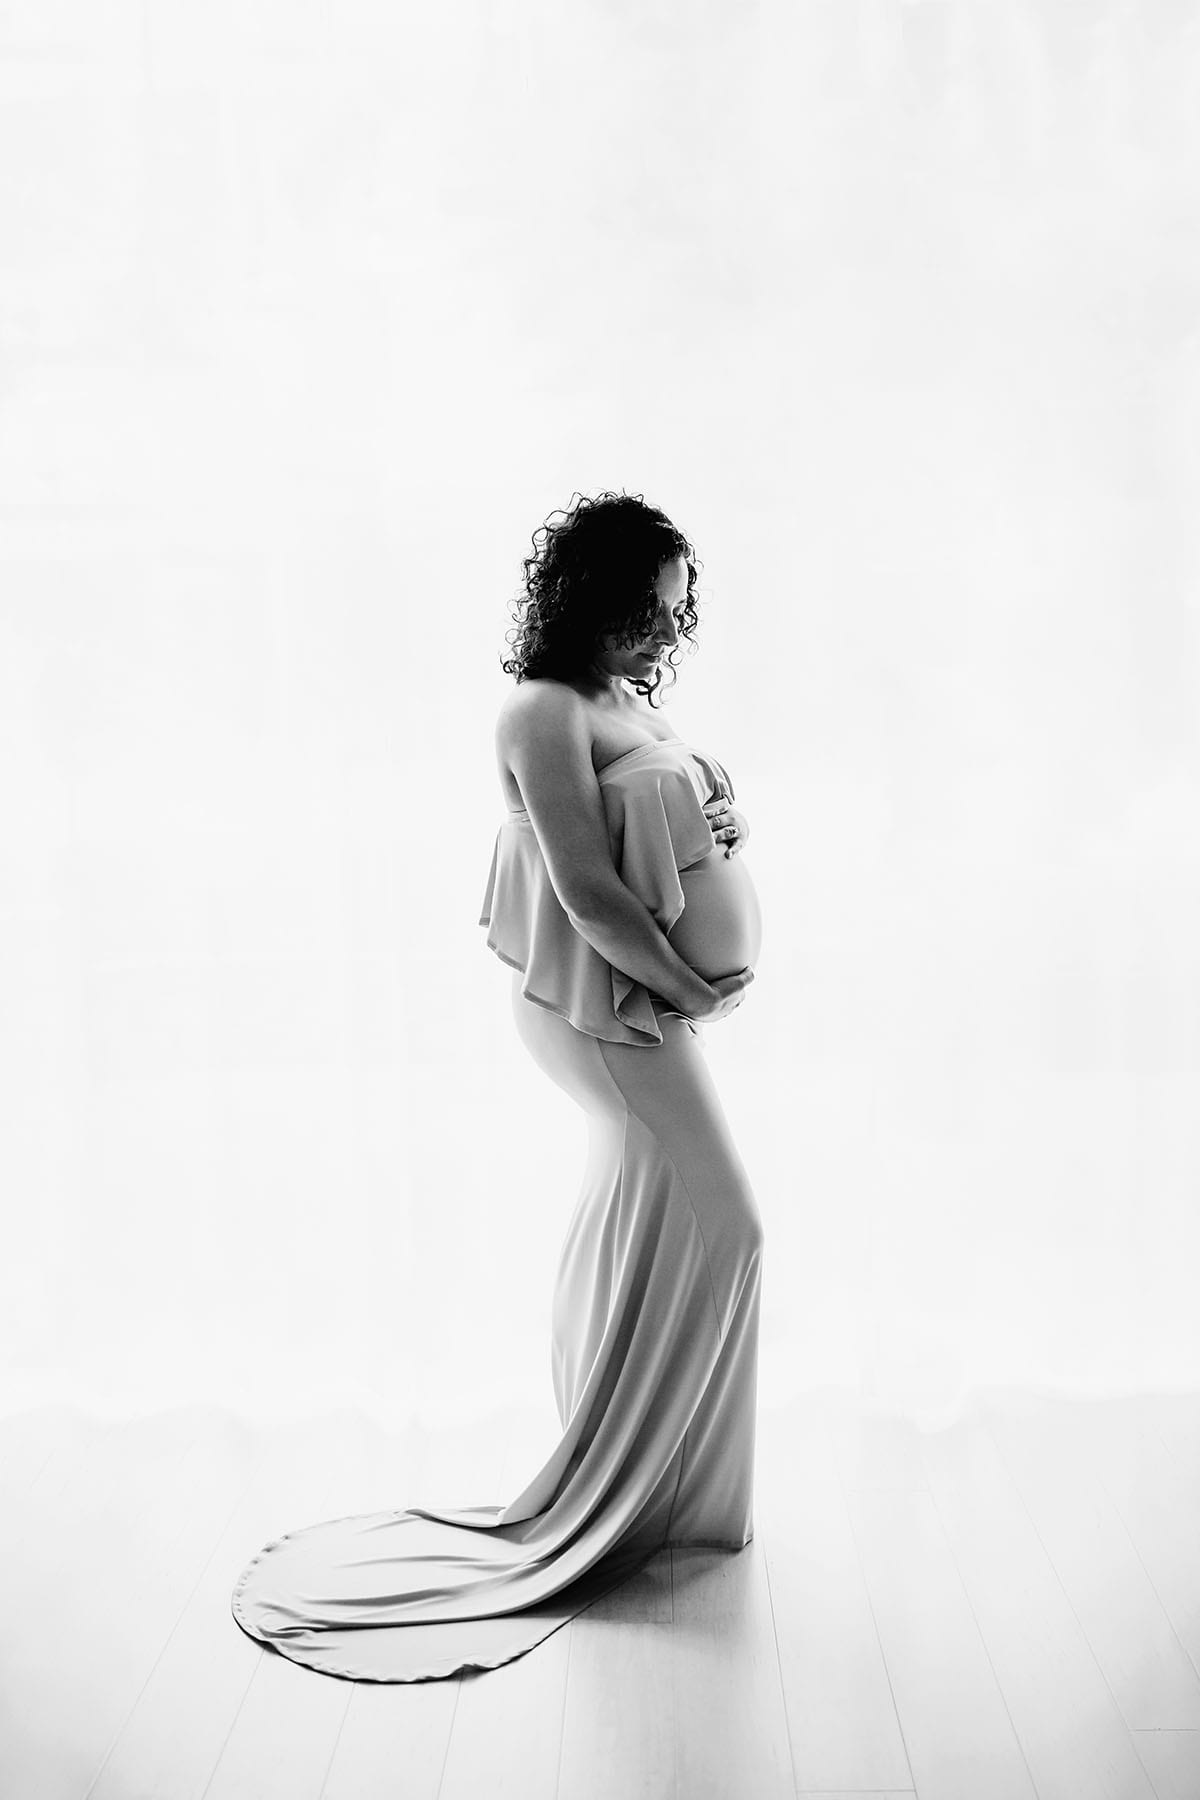 A pregnant woman cradles her belly as she stands in front of a bright window